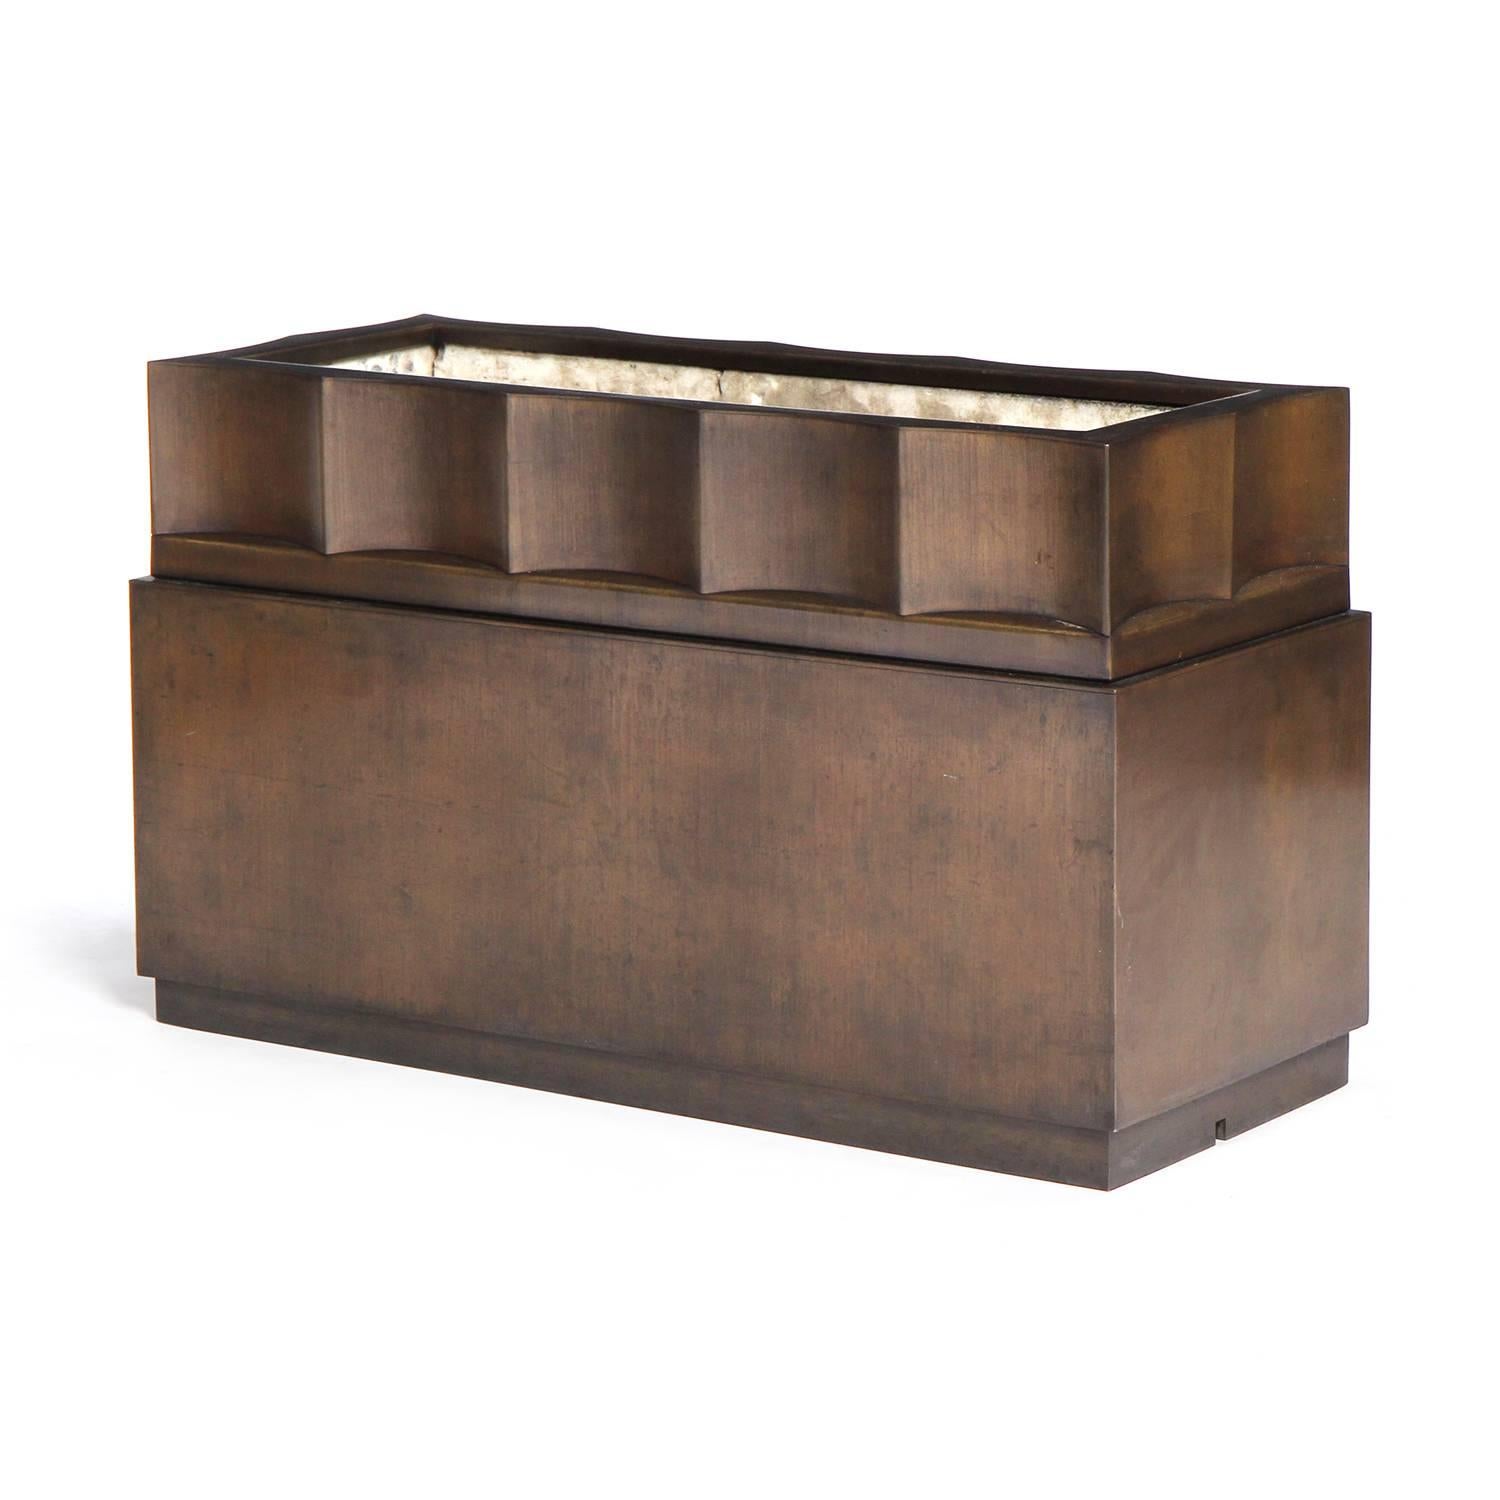 A stately, elegant and substantial planter finely crafted of patinated bronze, having a strong rectangular form with a recessed scalloped upper section.